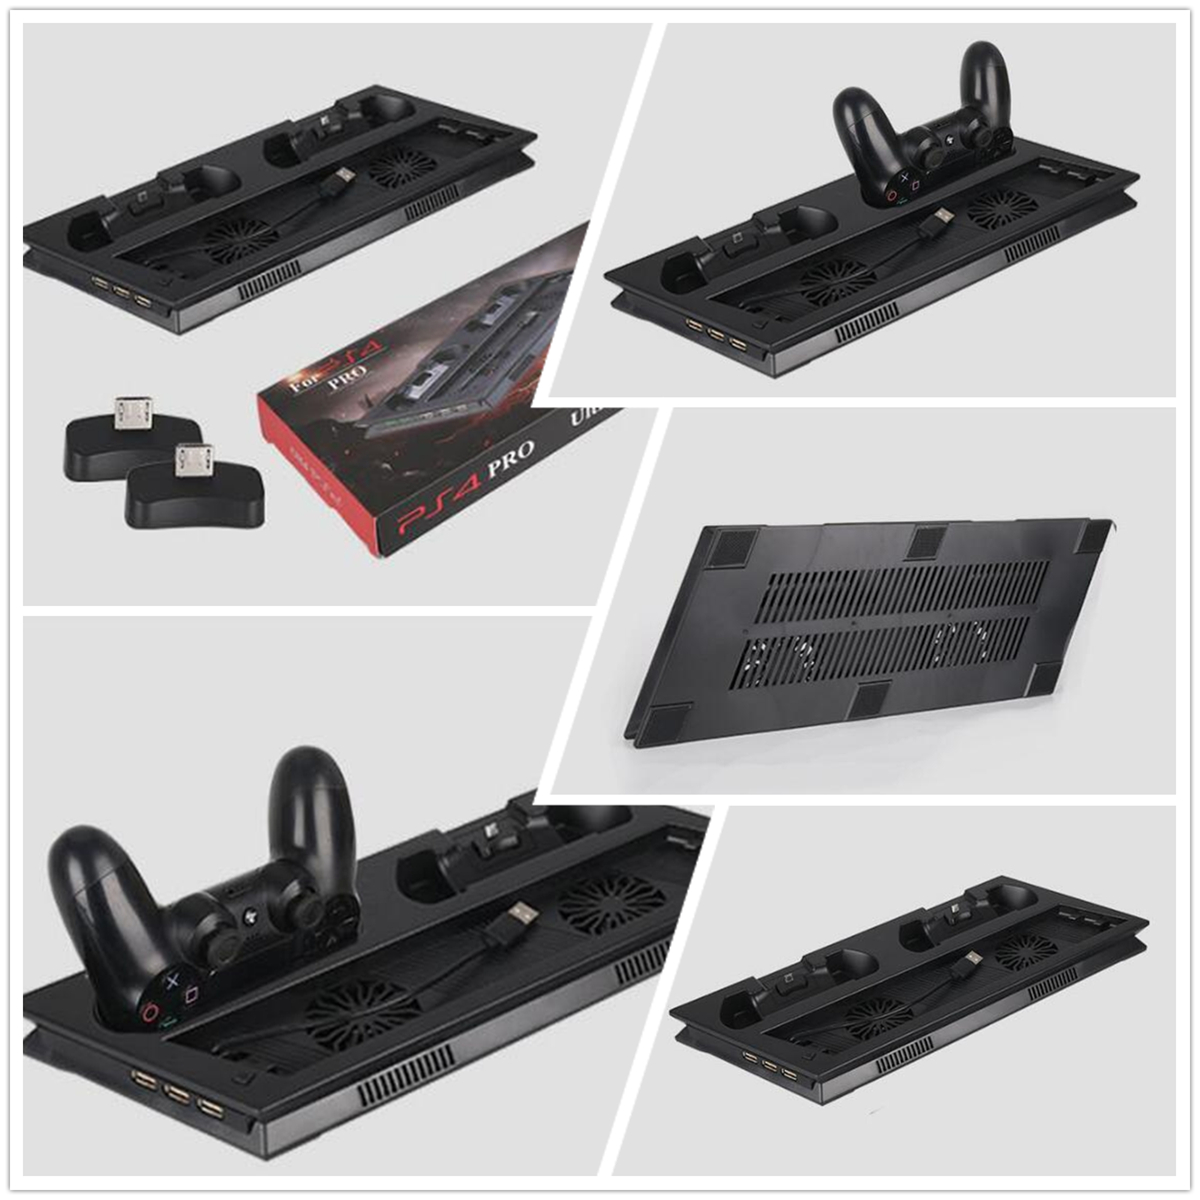 LED Charger Station Stand Charging Dock Cooling Fan for Sony Playstation 4 PS4 PRO Slim Game Console Gamepad 42